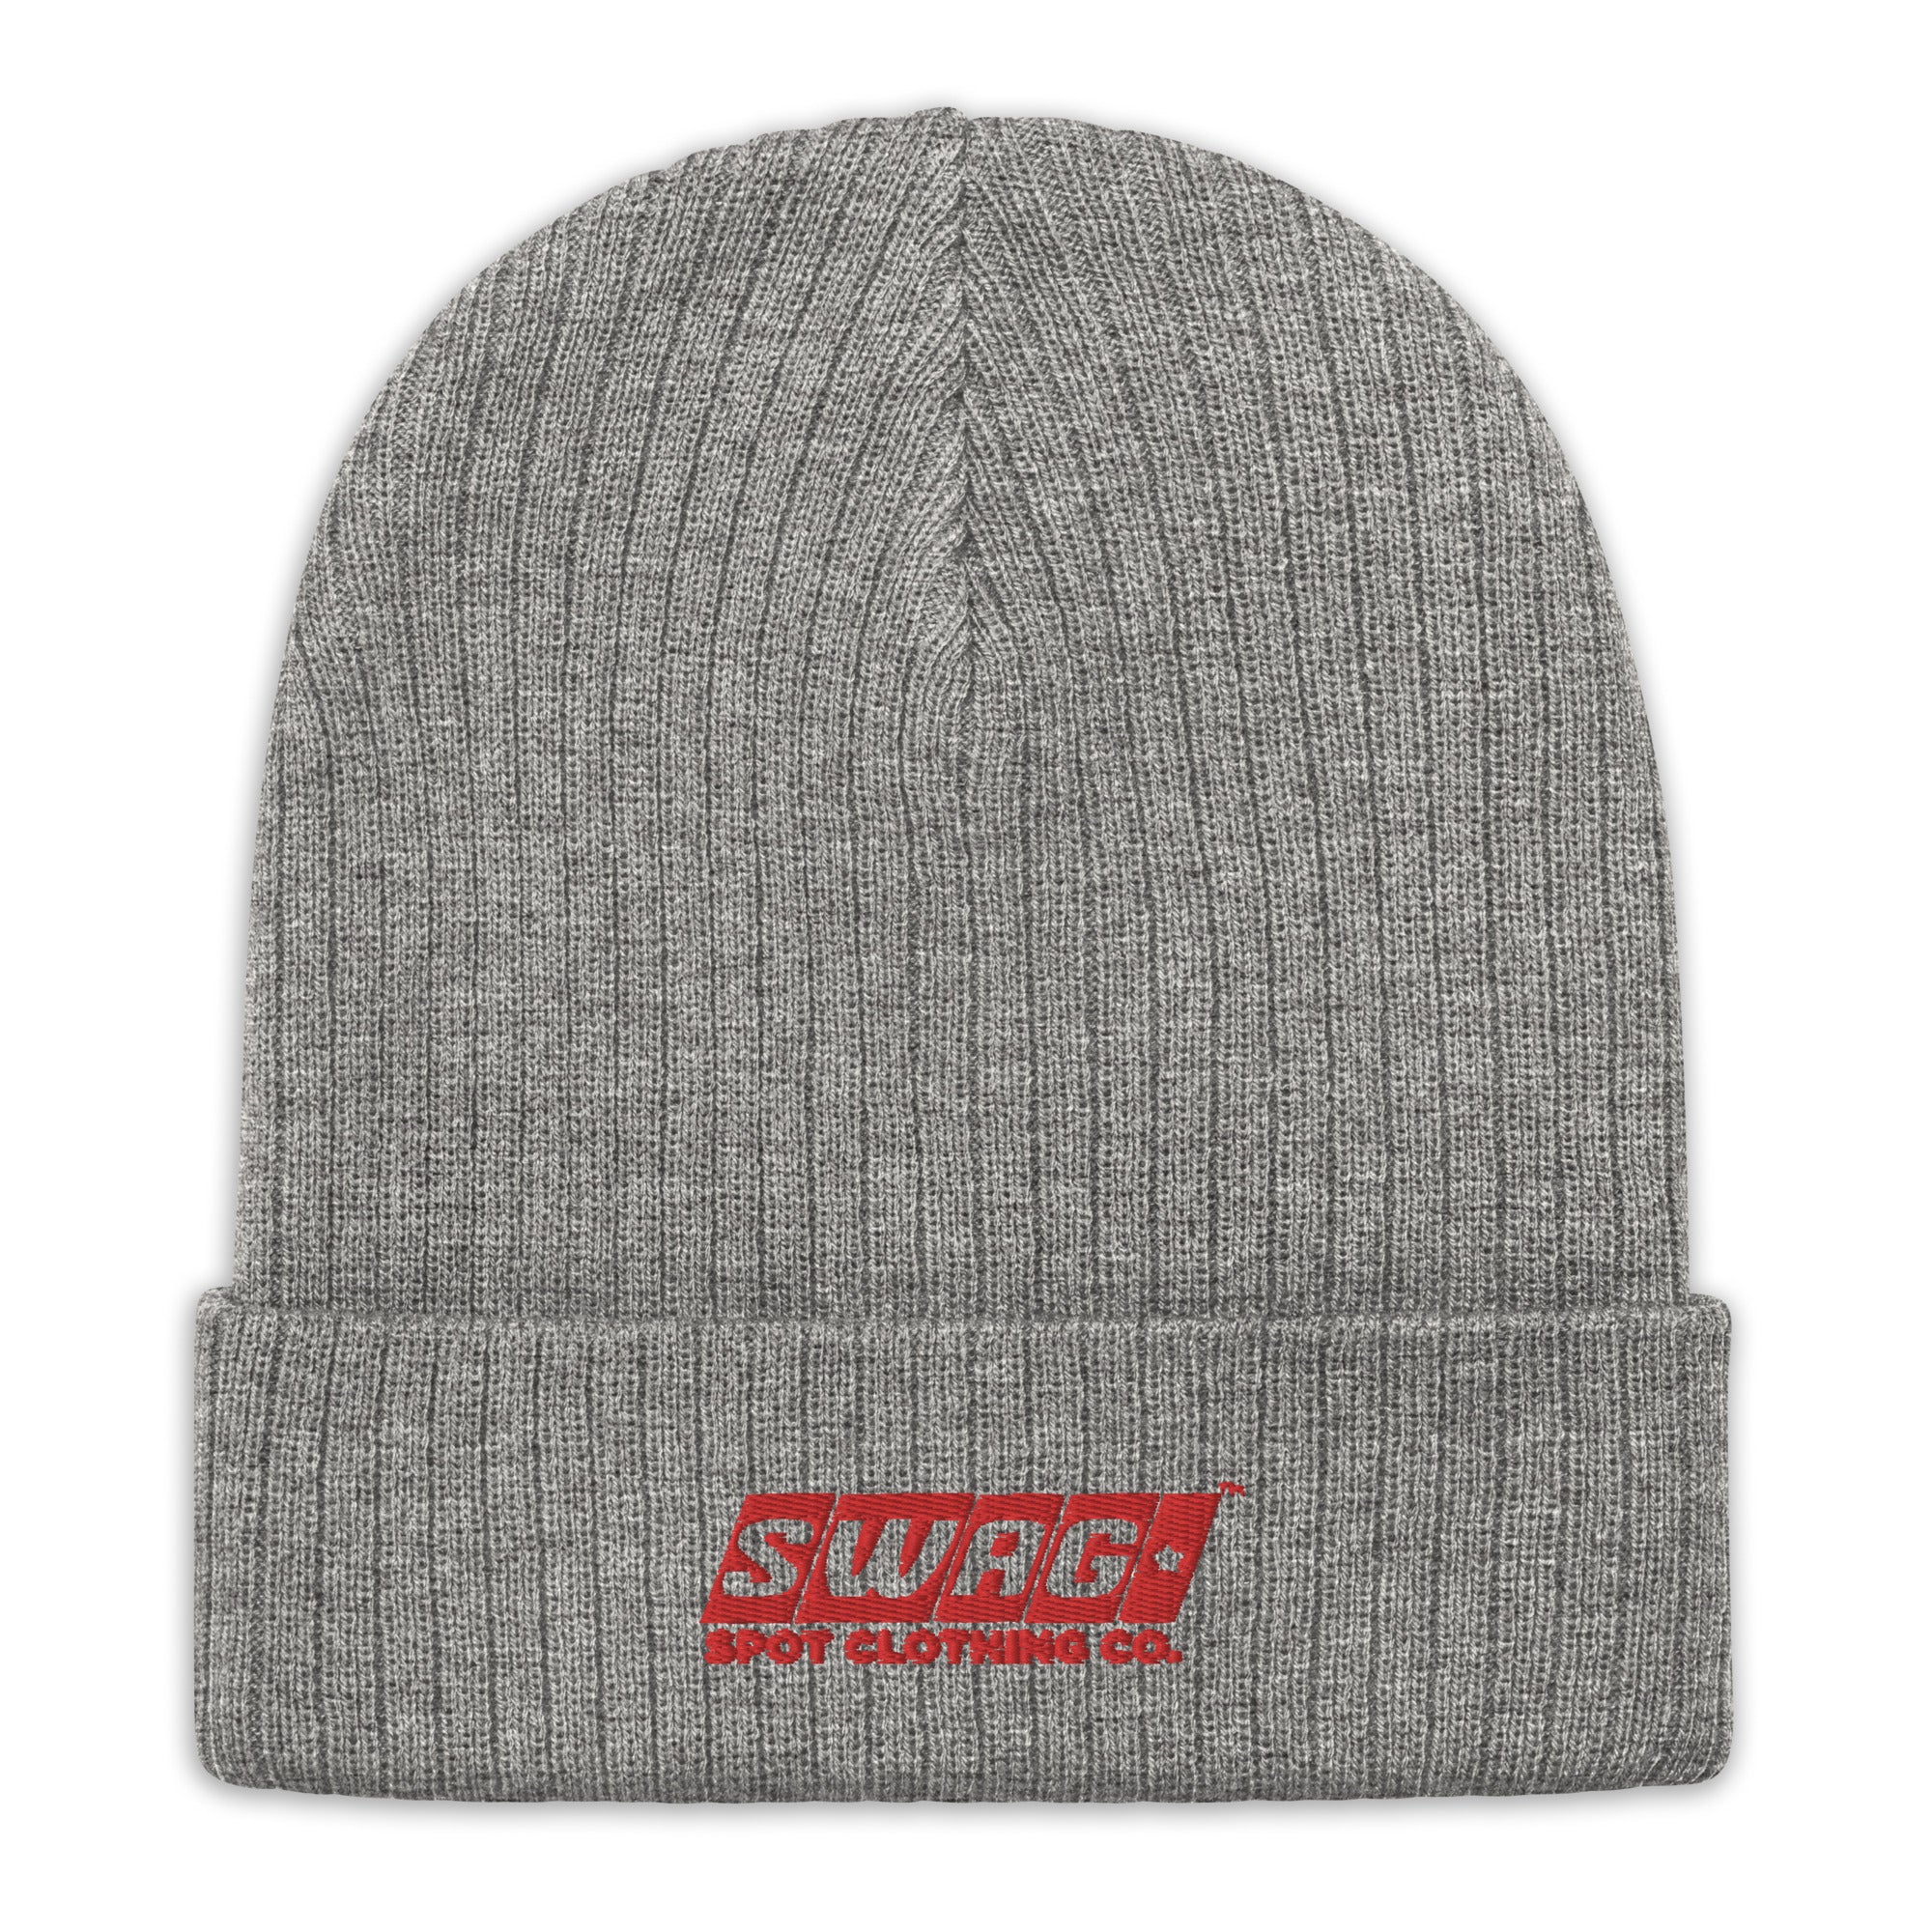 Swag Spot Clothing Co Classic Logo Ribbed knit beanie - Swag Spot Clothing Co